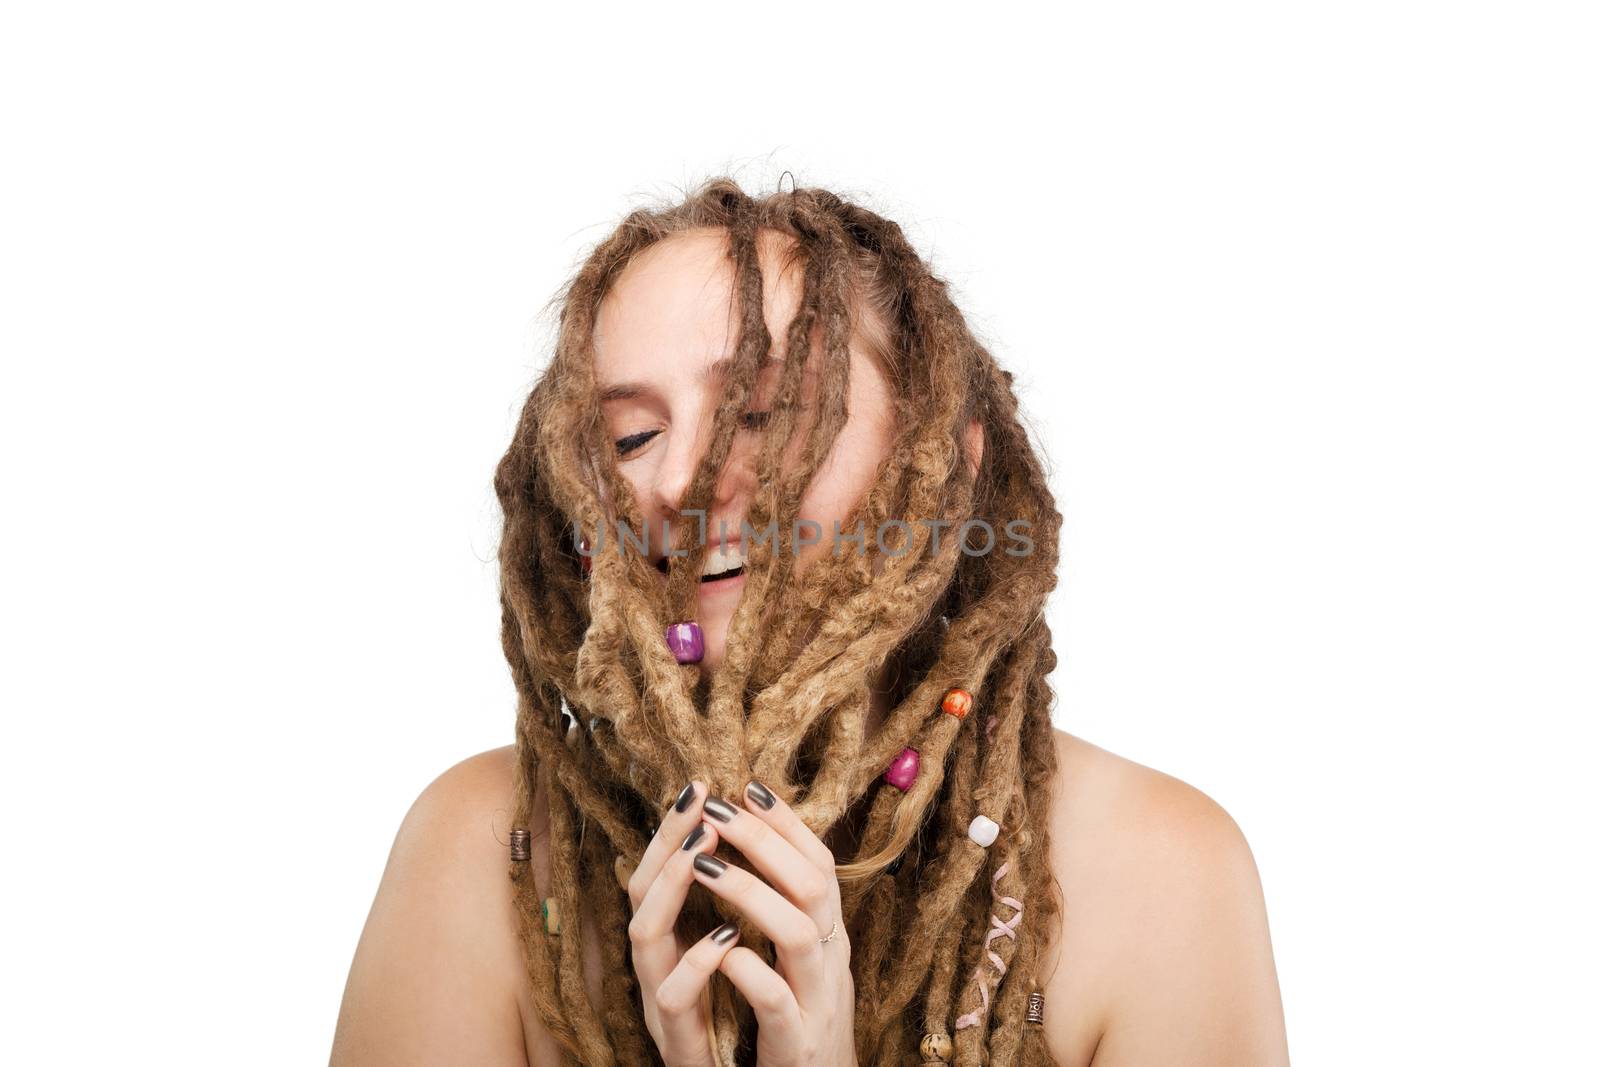 portrait of a caucasian girl with dreadlocks hairstyle